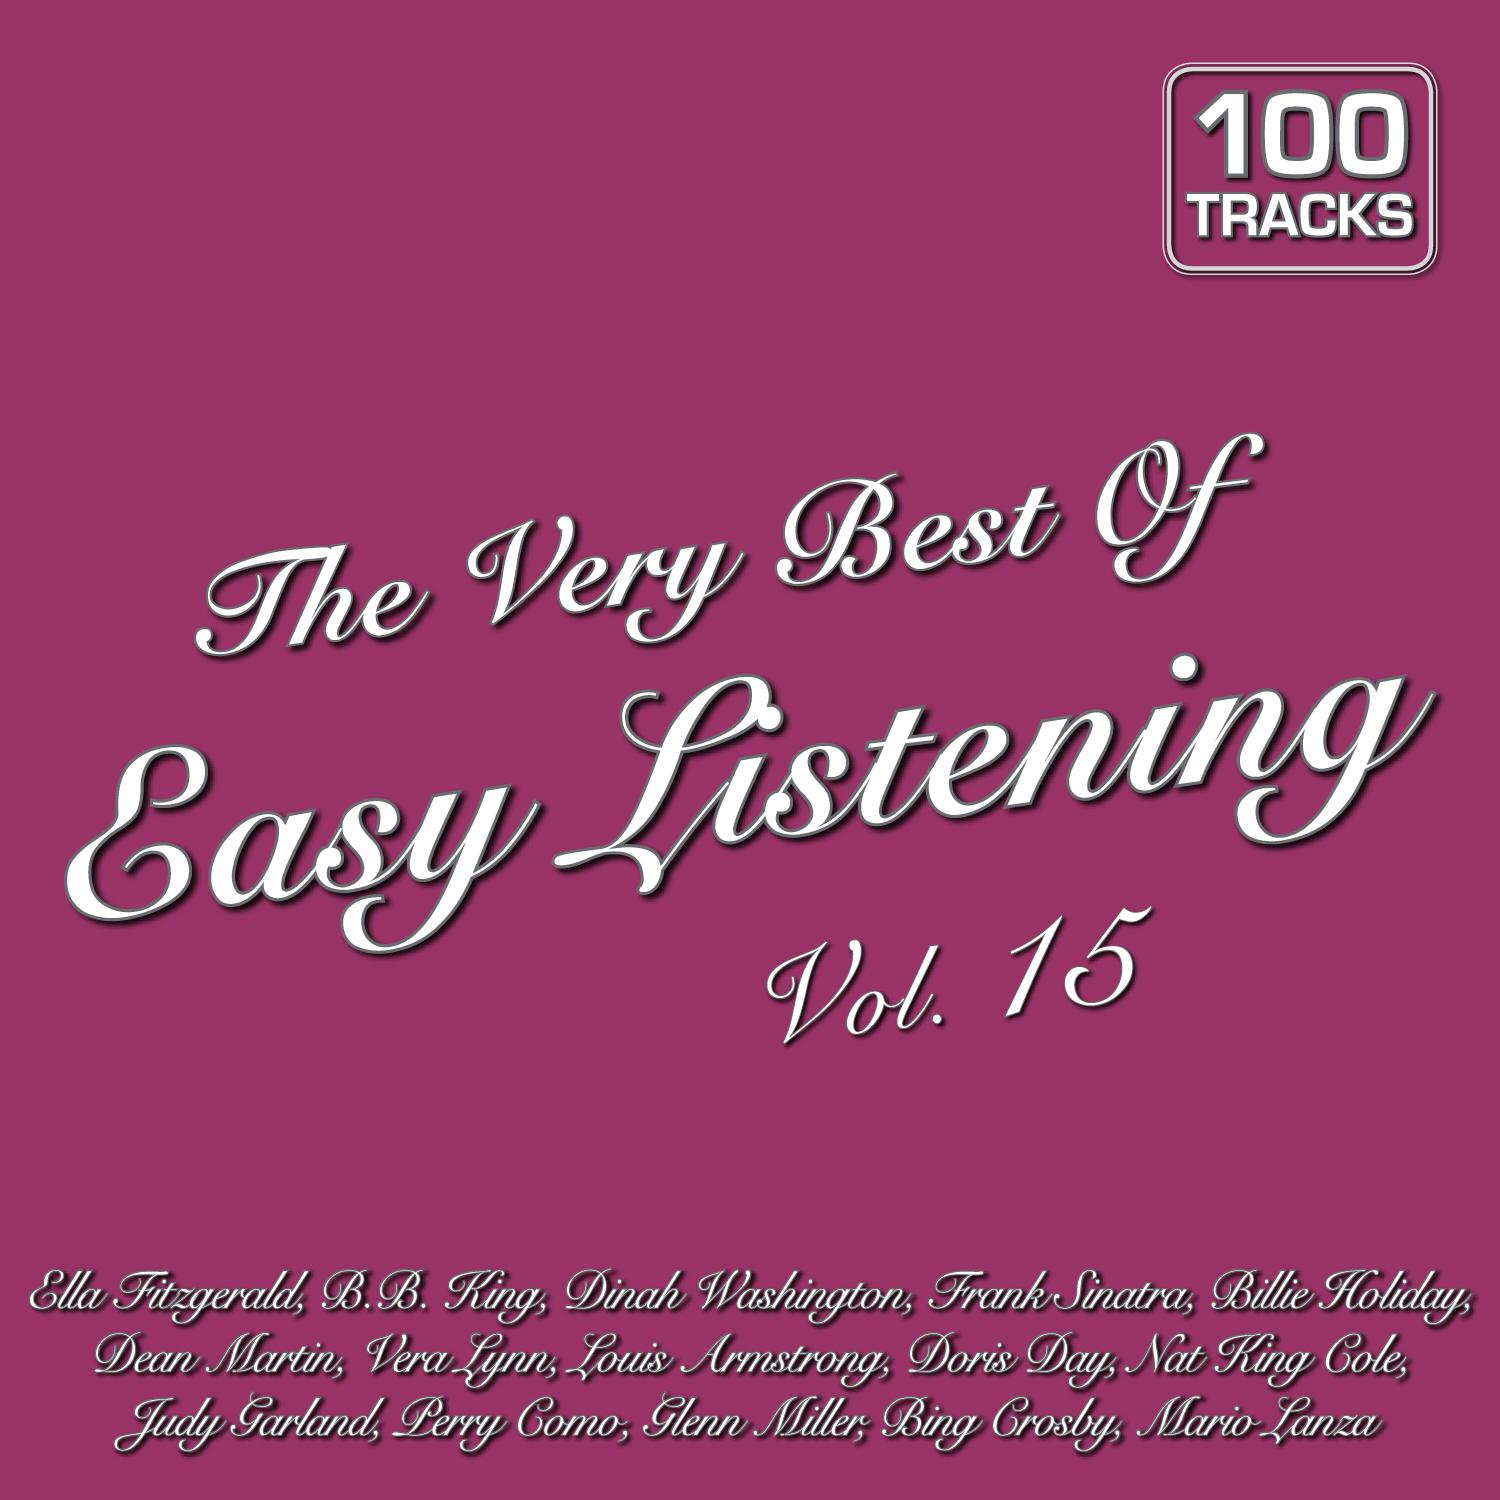 The Very Best of Easy Listening Vol. 15